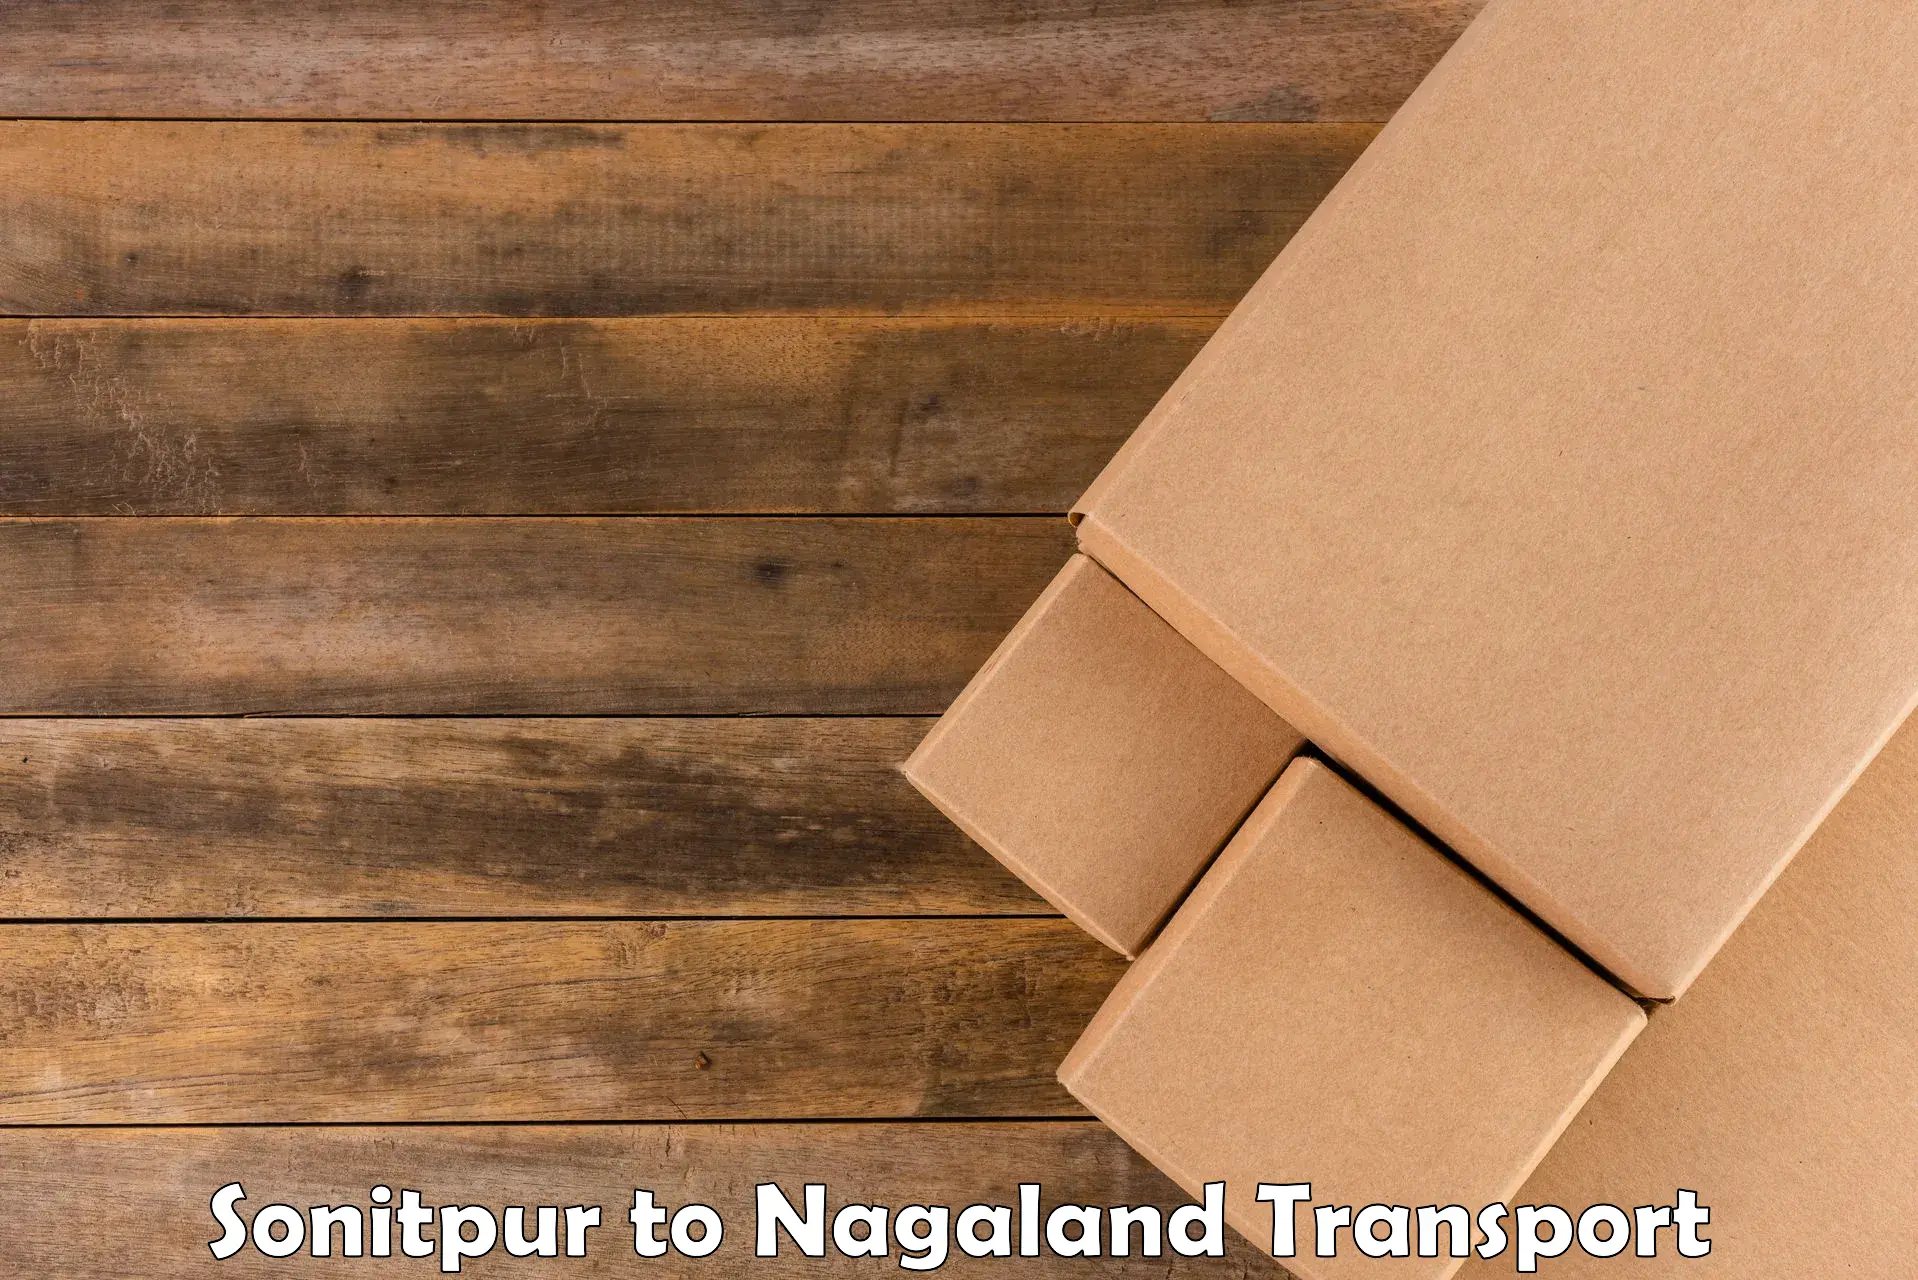 Container transport service Sonitpur to NIT Nagaland